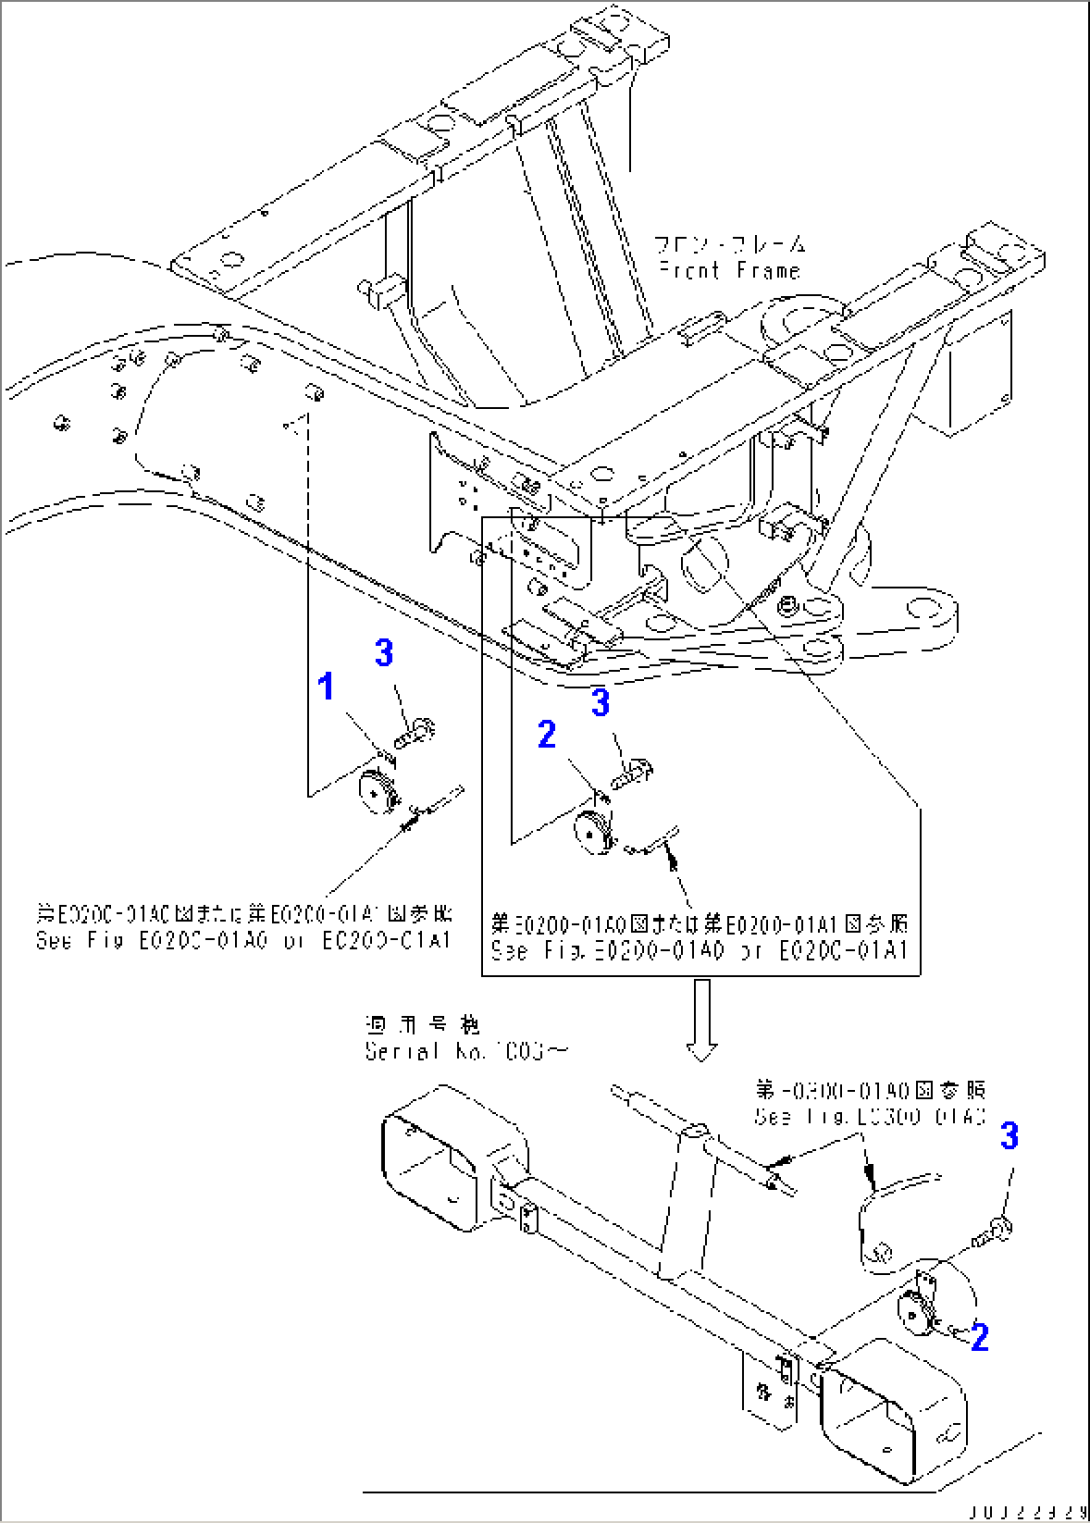 ELECTRICAL SYSTEM (HORN)